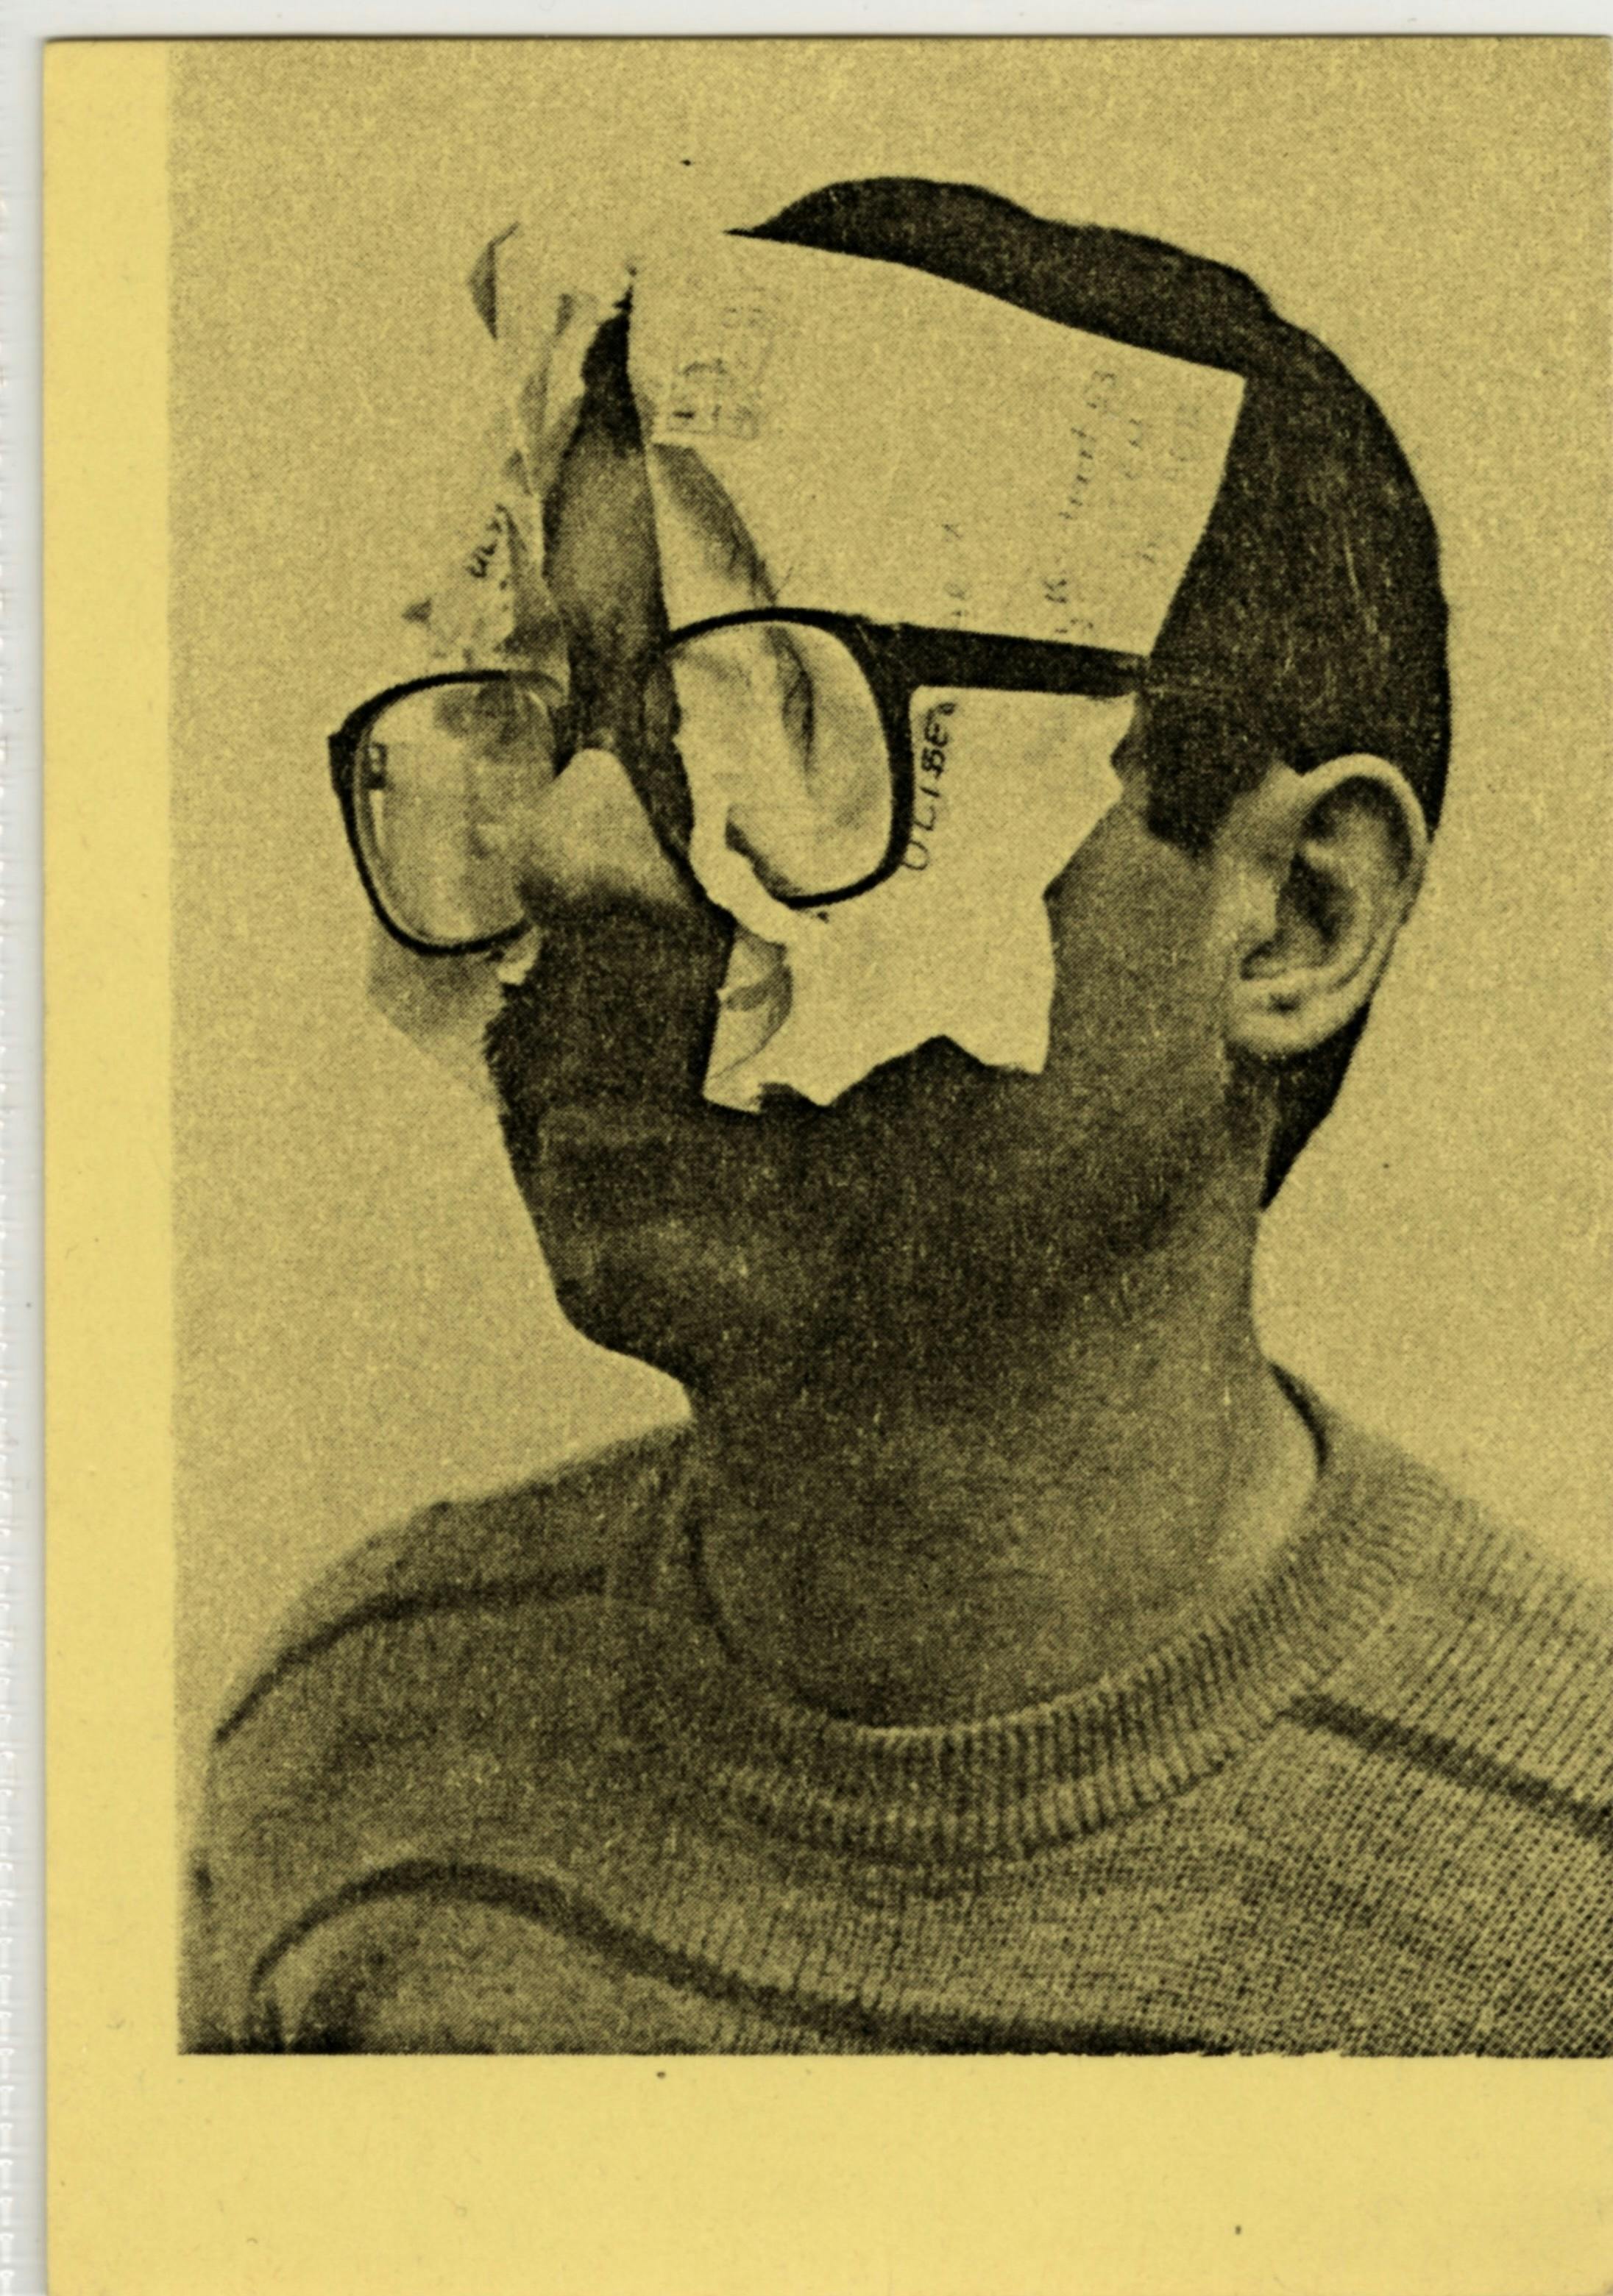 A horizontal yellow postcard printed with a black image of a man in three quarter view. He is wearing glasses. Crumpled pieces of paper have been stuffed behind each lens.